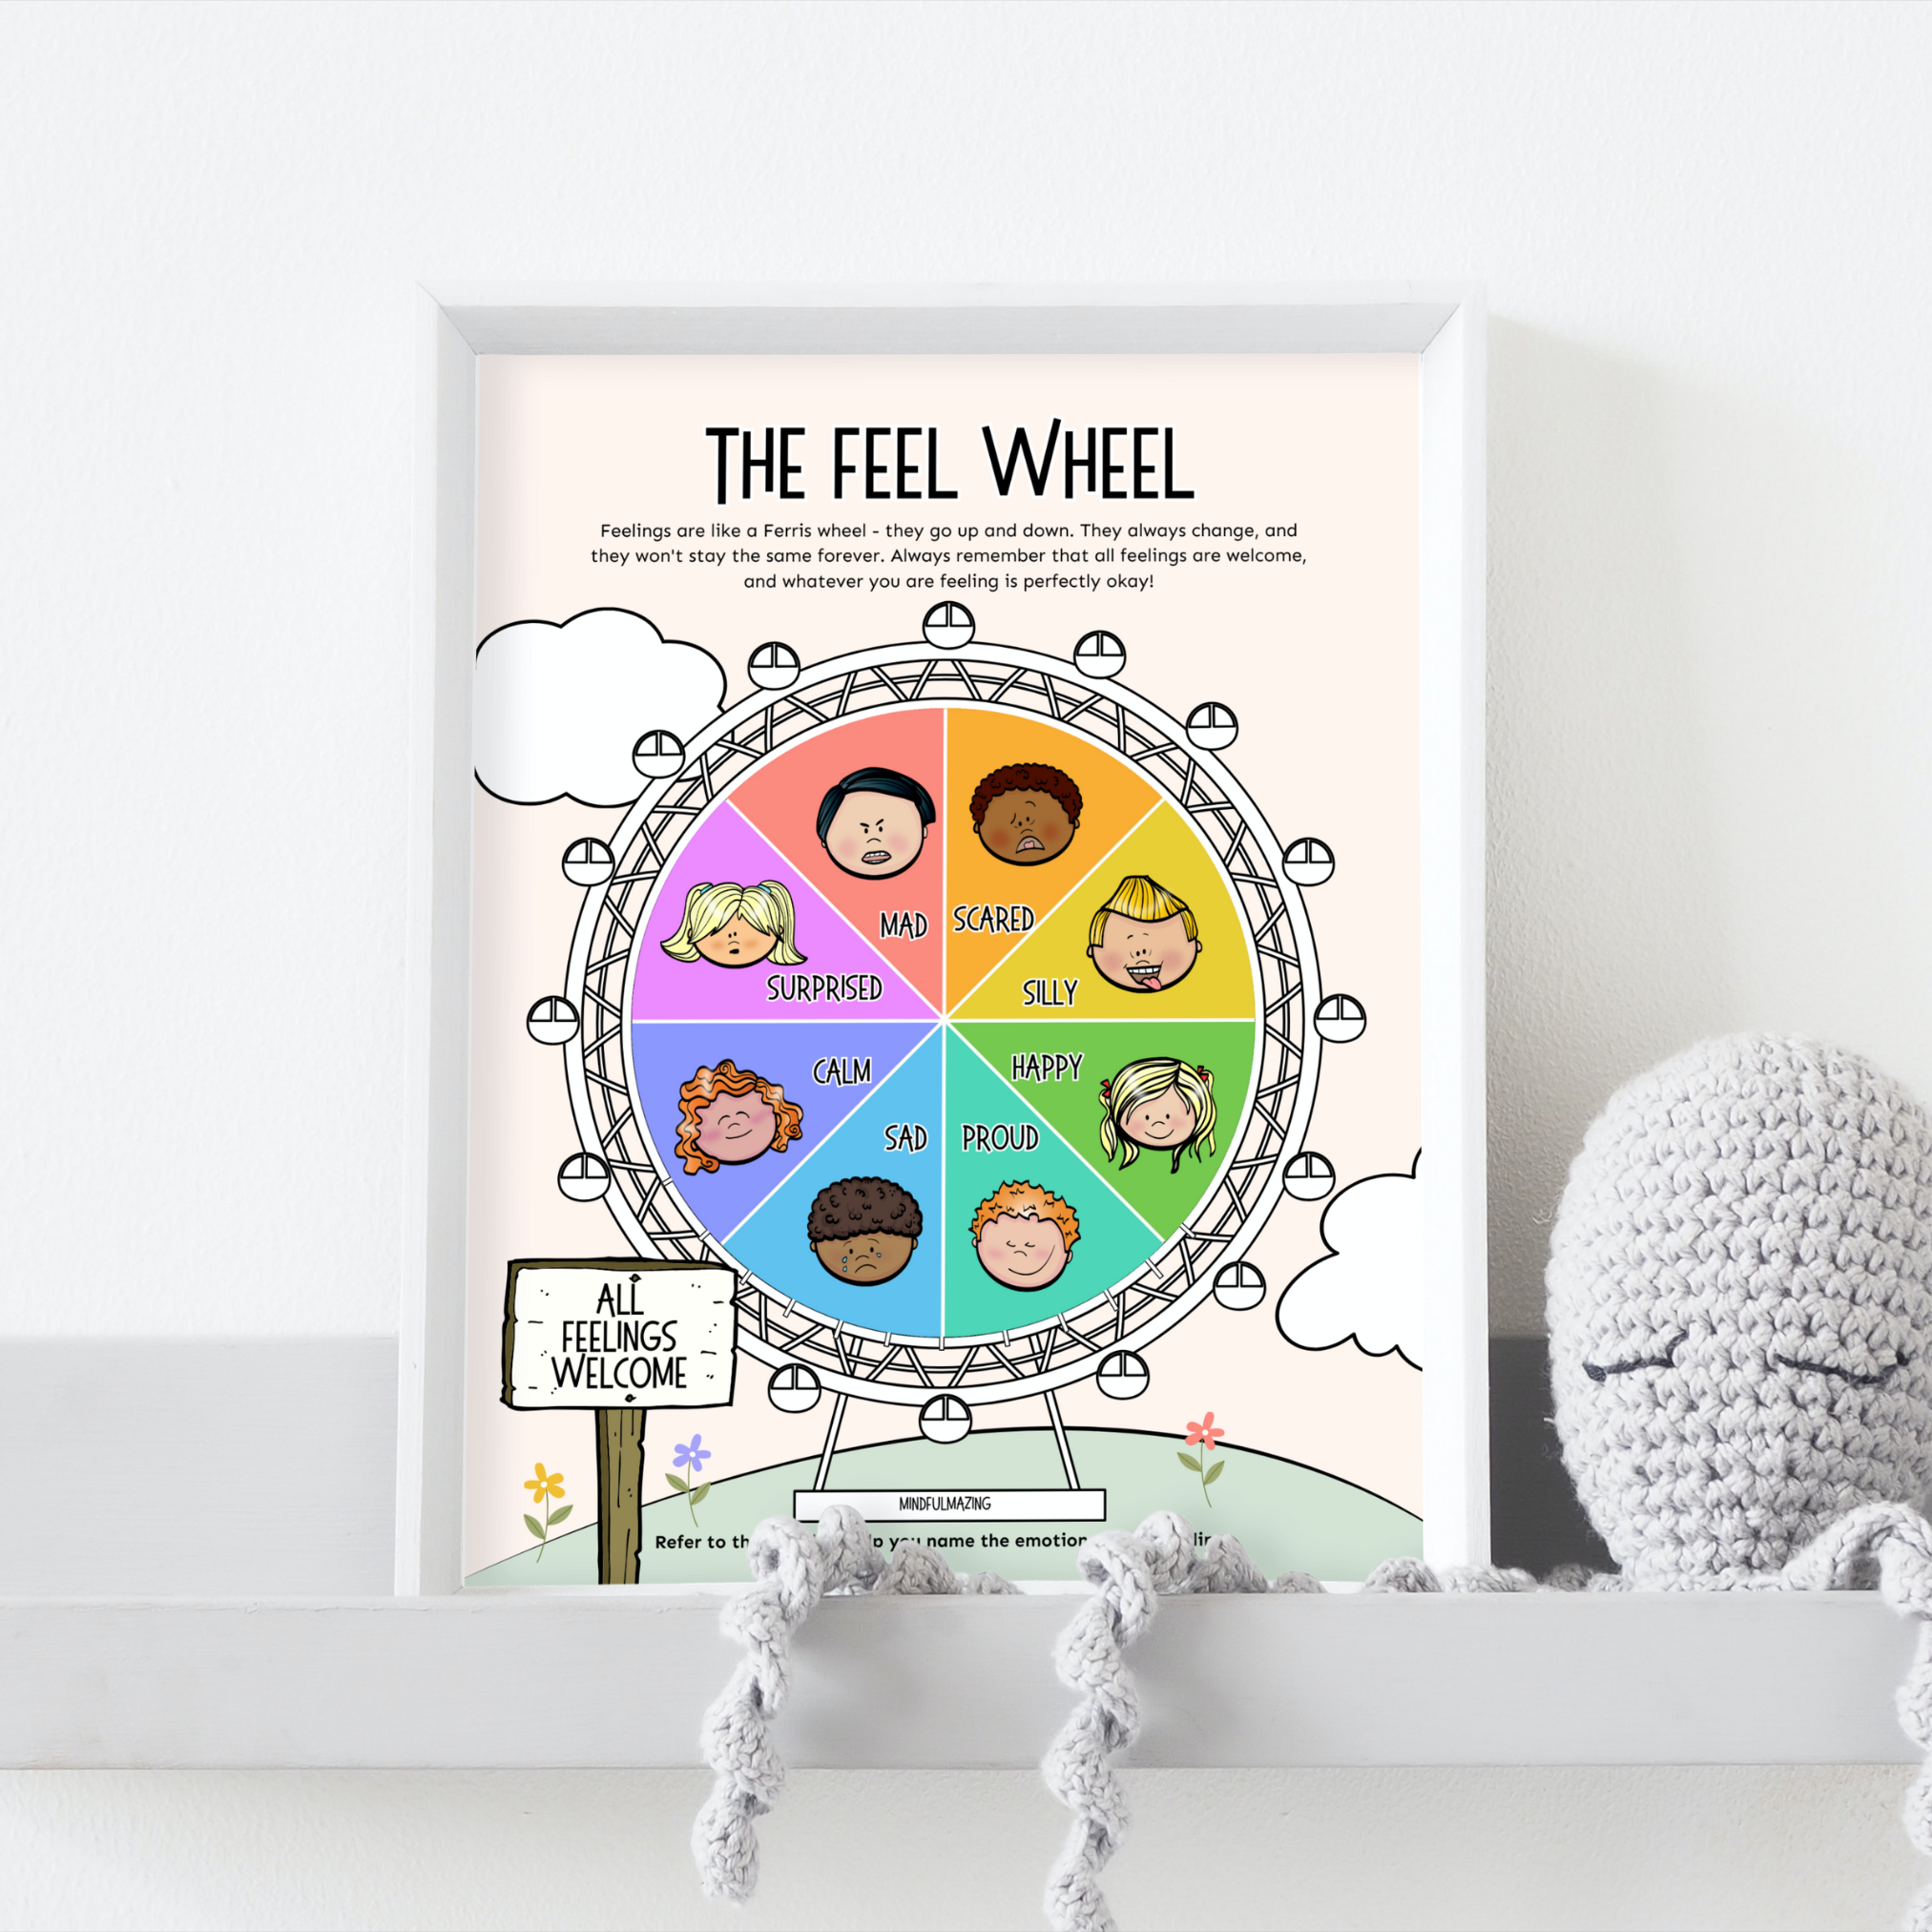 Wheel of Feelings (PDF) Ages 2 to 5